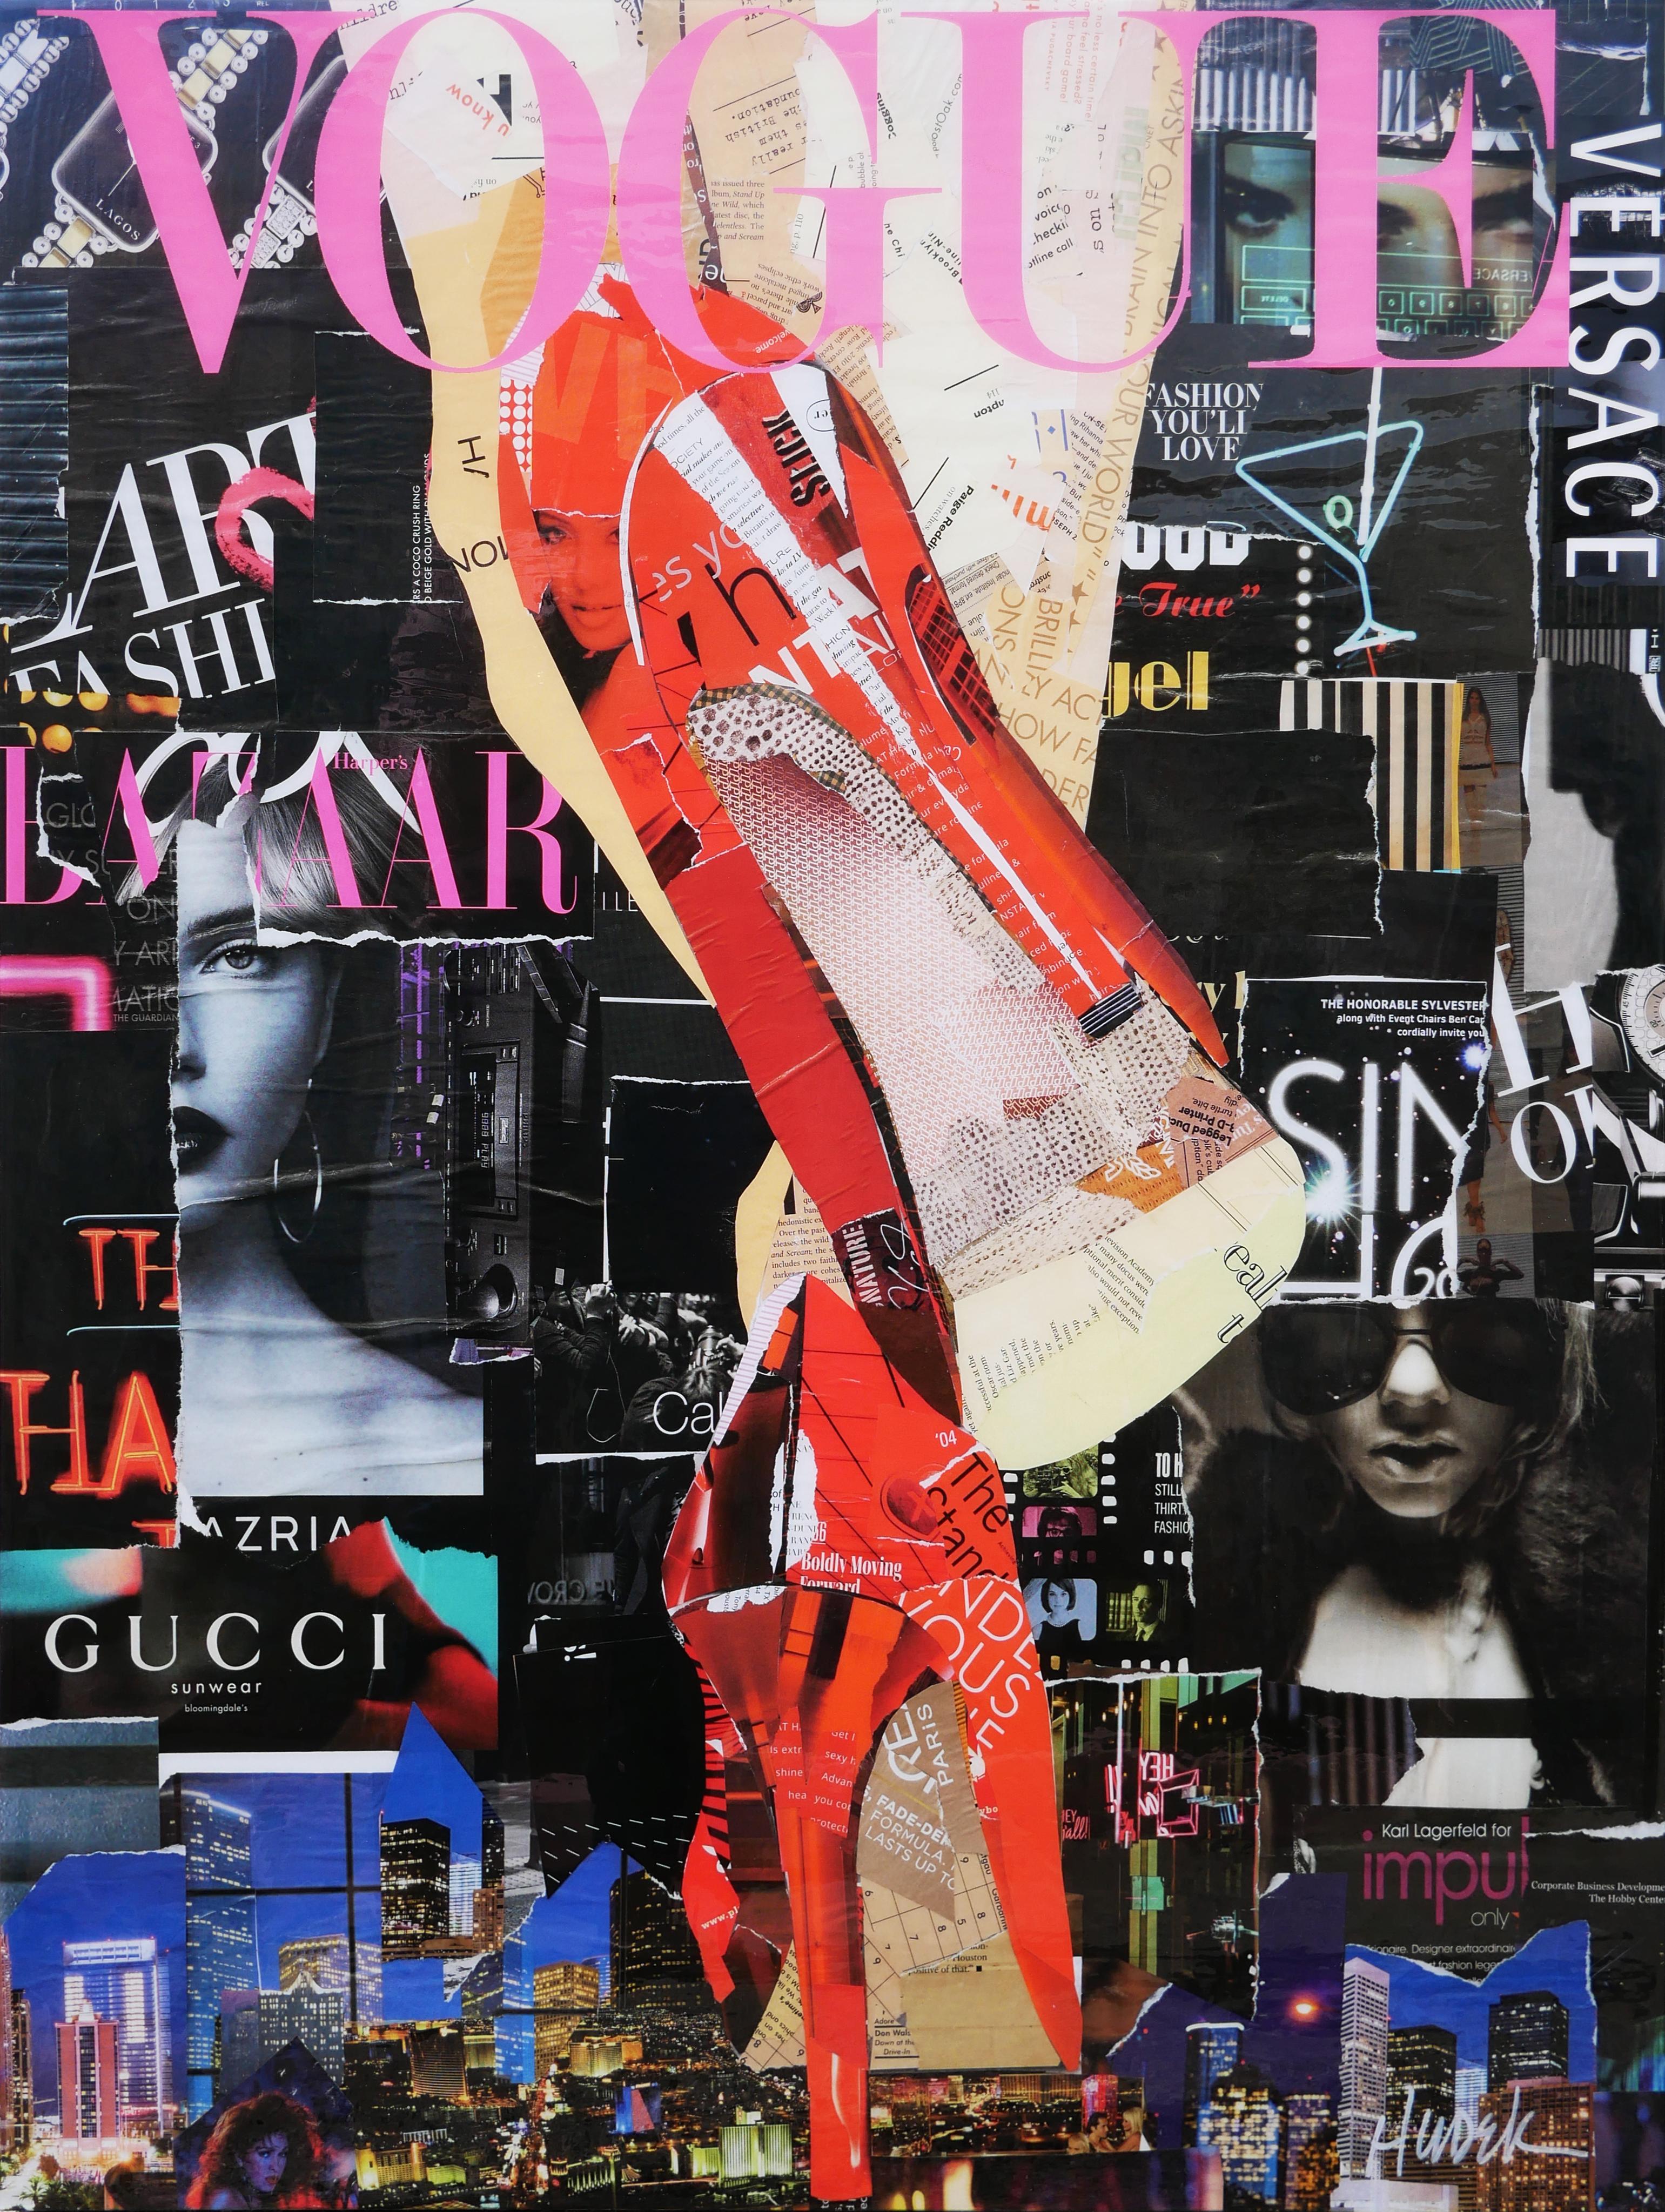 Jim Hudek Figurative Painting - “Red High Heel” Contemporary Vogue Mixed Media Pop Art Assemblage Collage